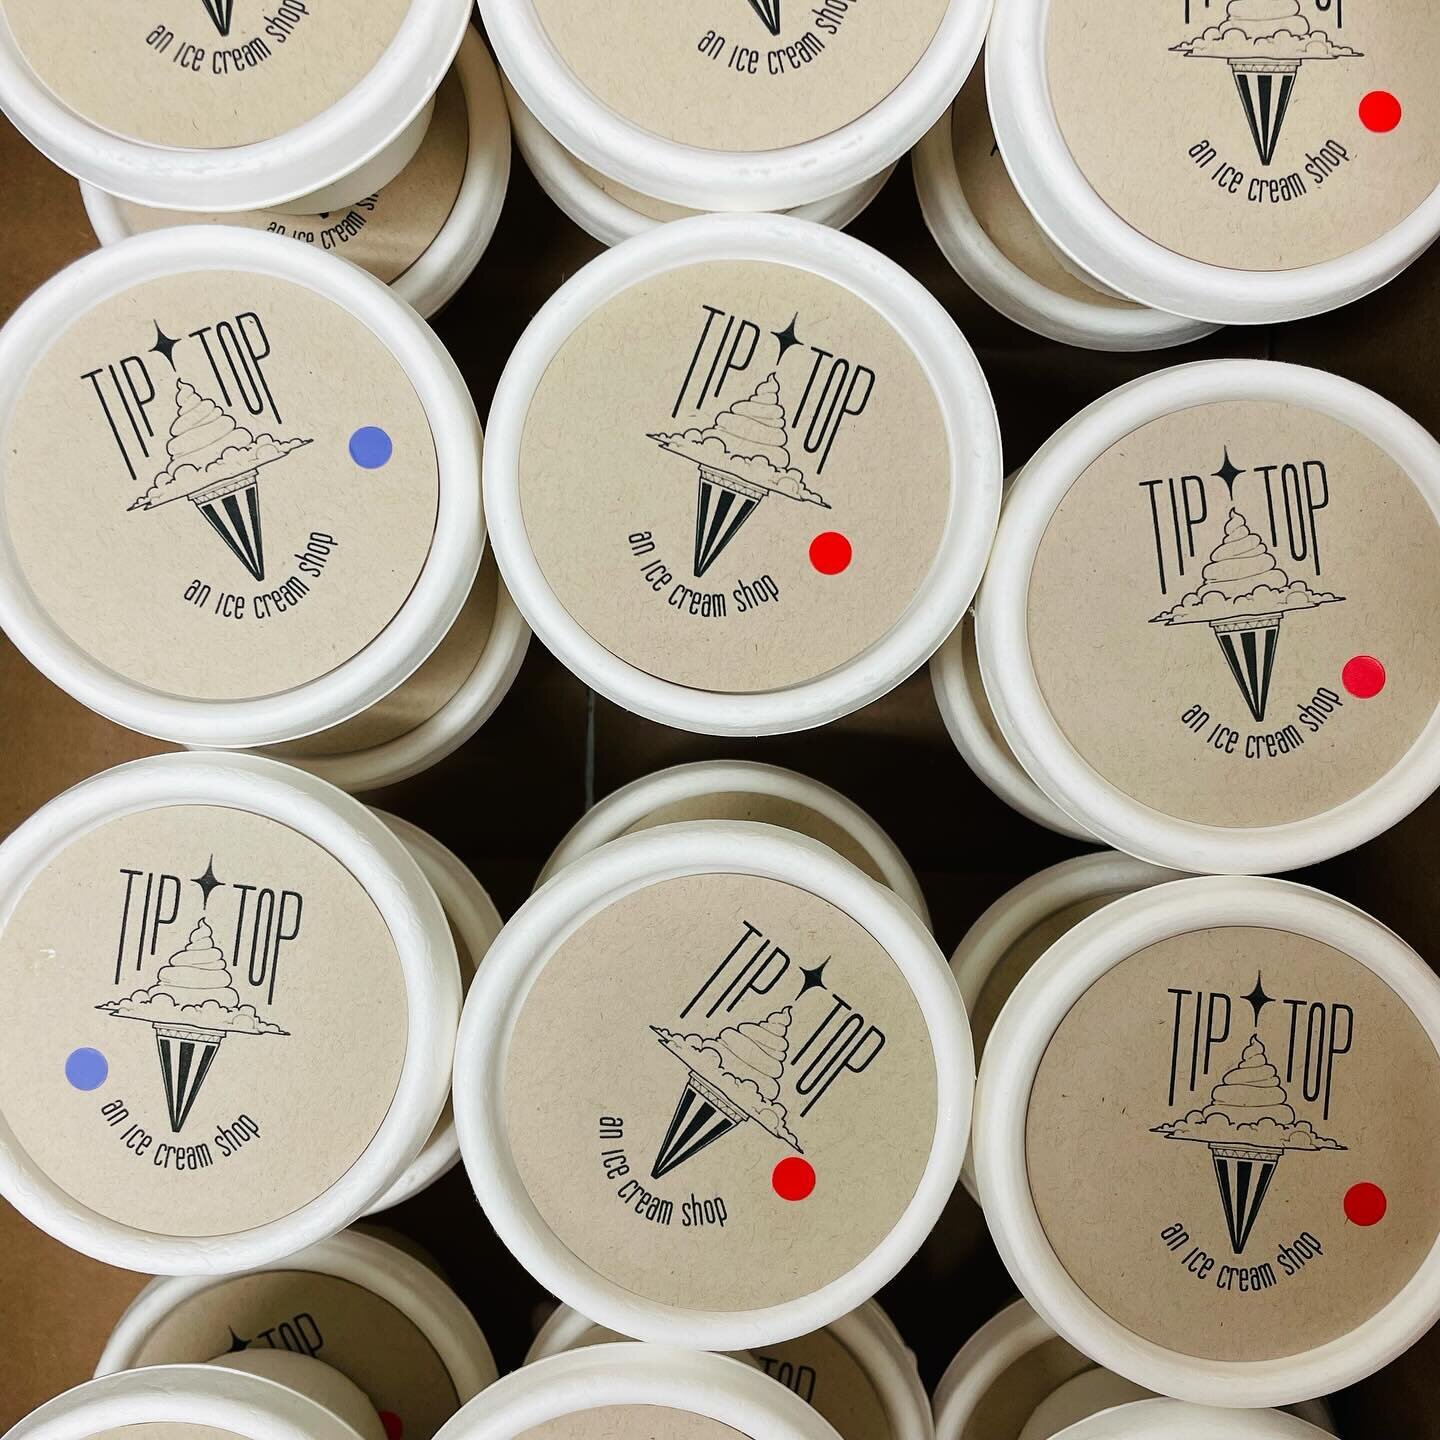 Prepping a catering order for what promises to be a VERY fun birthday party this weekend. Did you know we now offer catering? Head over to our website for more info on how to make your party Tip Top 🙌 
 
#NZxNW #icecream #catering #icecreamcatering 